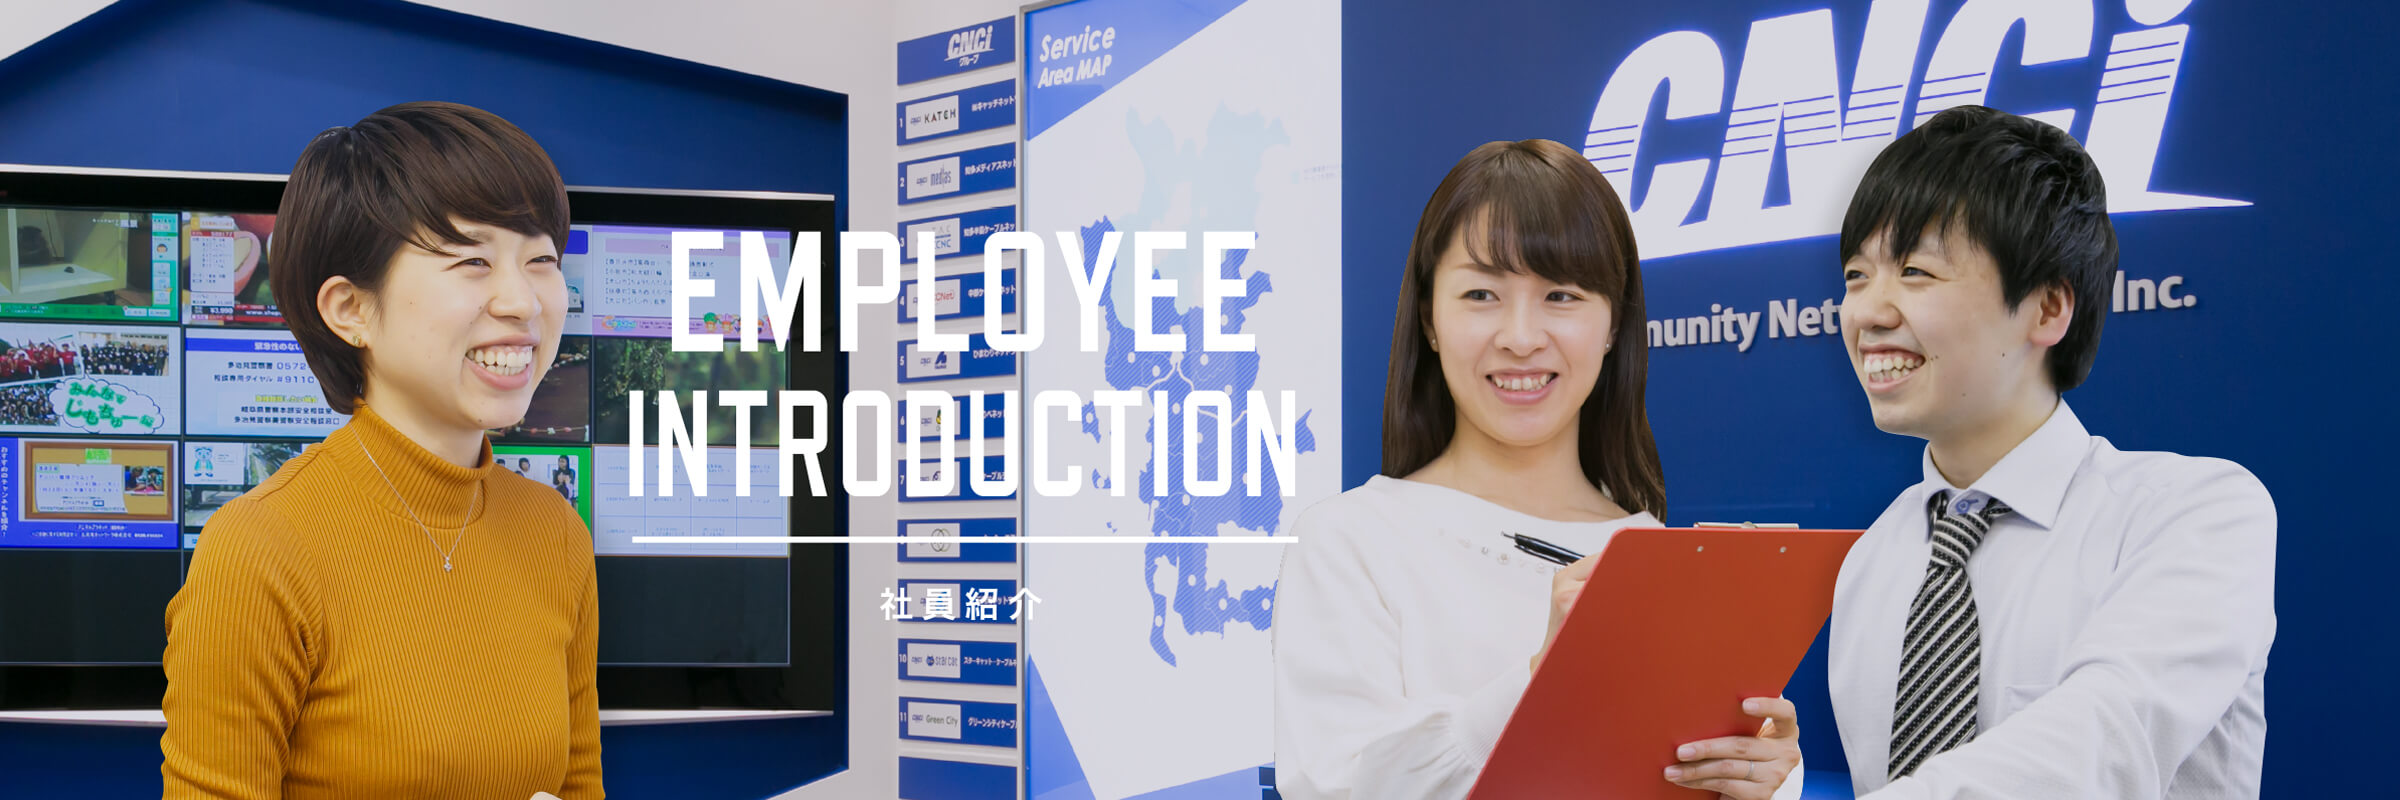 EMPLOYEE INTRODUCTION 社員紹介